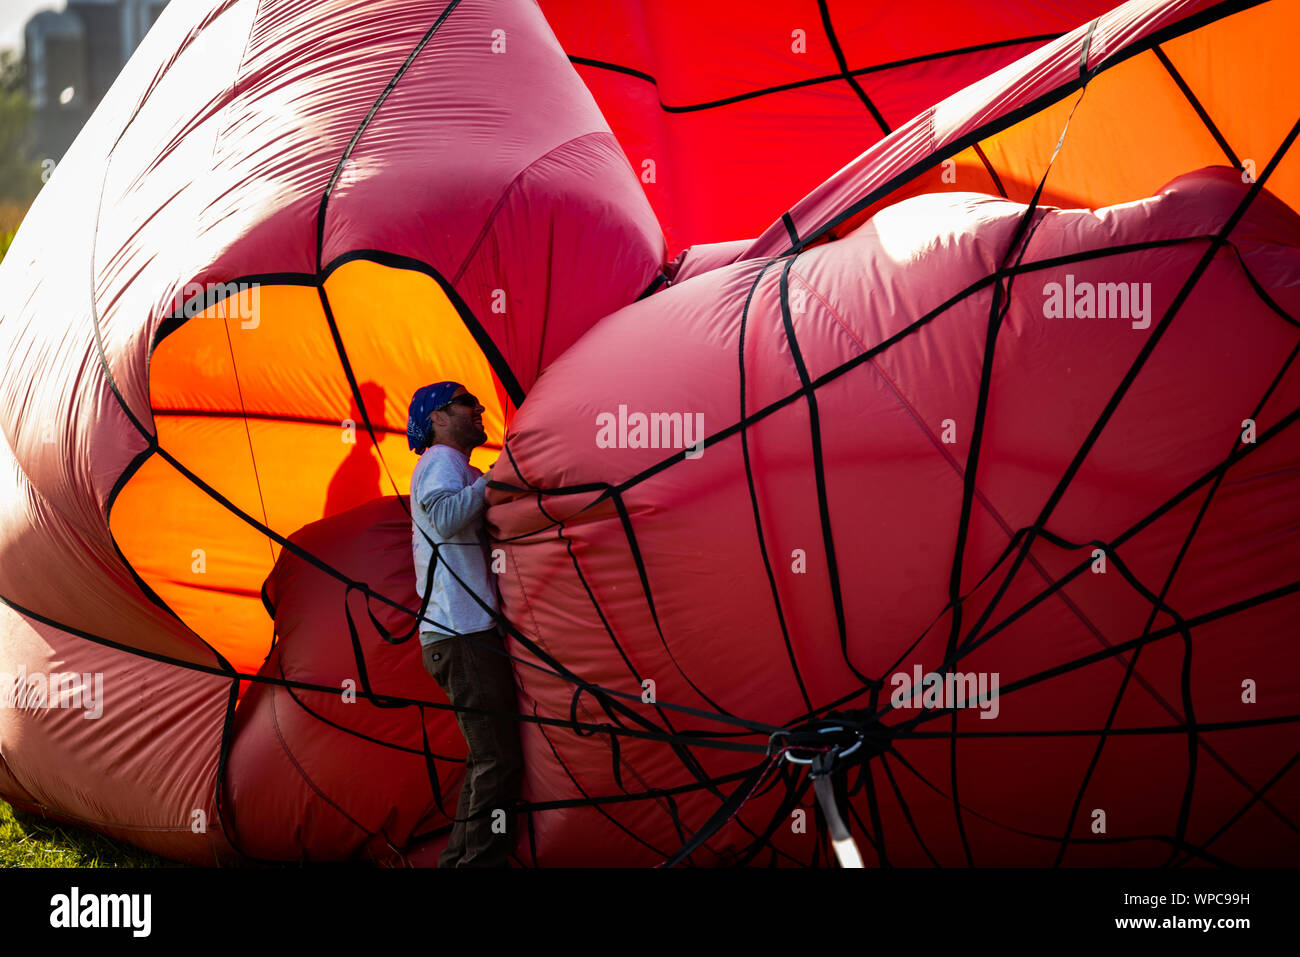 Lancaster, Pennsylvania, USA. 7 September, 2019. Hundreds gathered in a field in Bird-In-Hand, Pennsylvania for the second day of the annual Hot Air Balloon Festival. High winds prevented any balloons from launching, but crews organized a twilight 'flaring'. Credit: Chris Baker Evens/Alamy Live News. Stock Photo